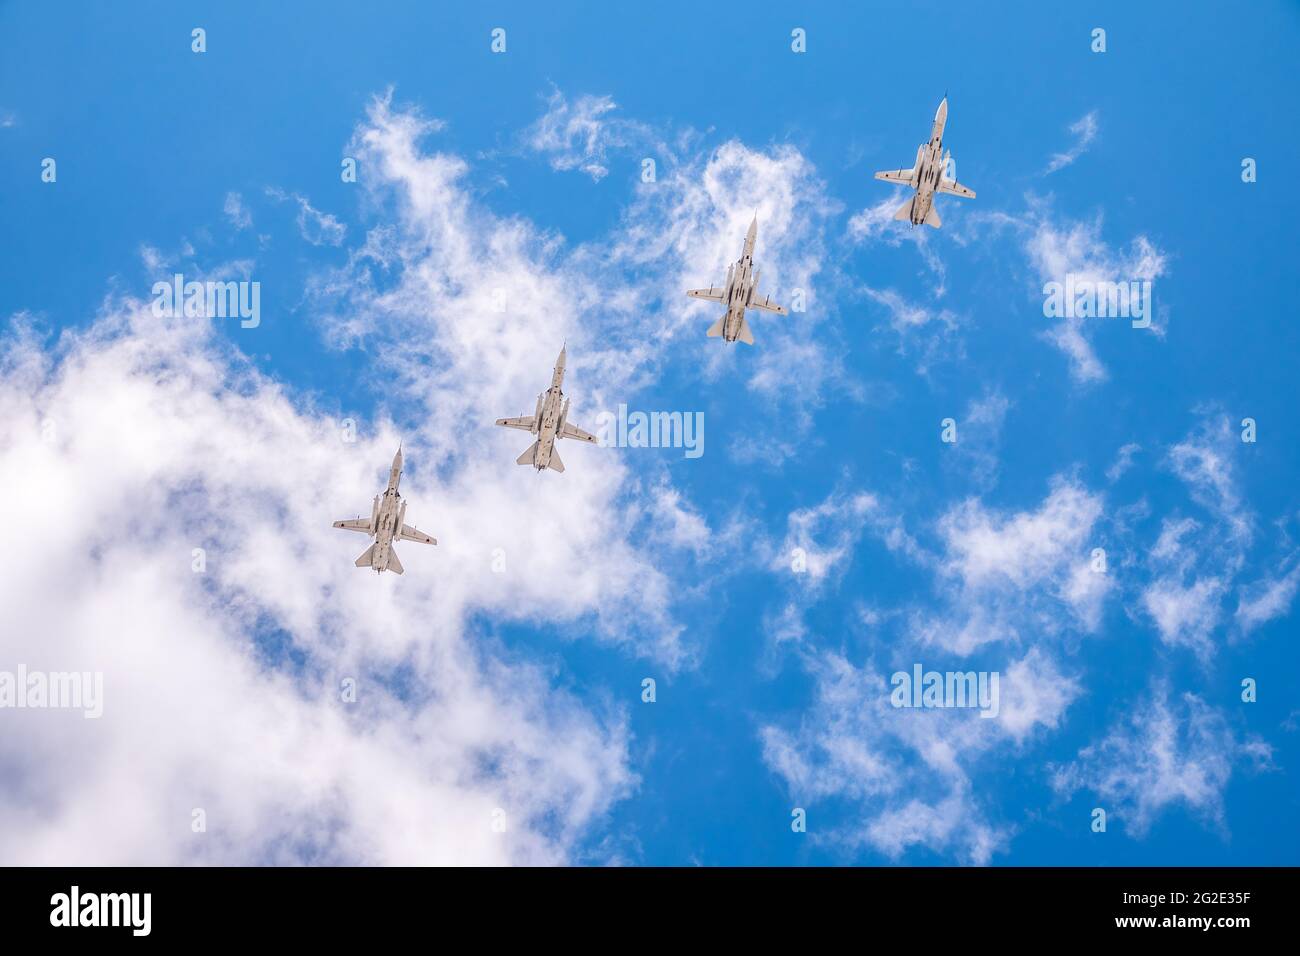 Moscow, Russia - May, 05, 2021: Sukhoi SU-24 flying over Red Square during the preparation of the Victory Day May 9 parade. Stock Photo